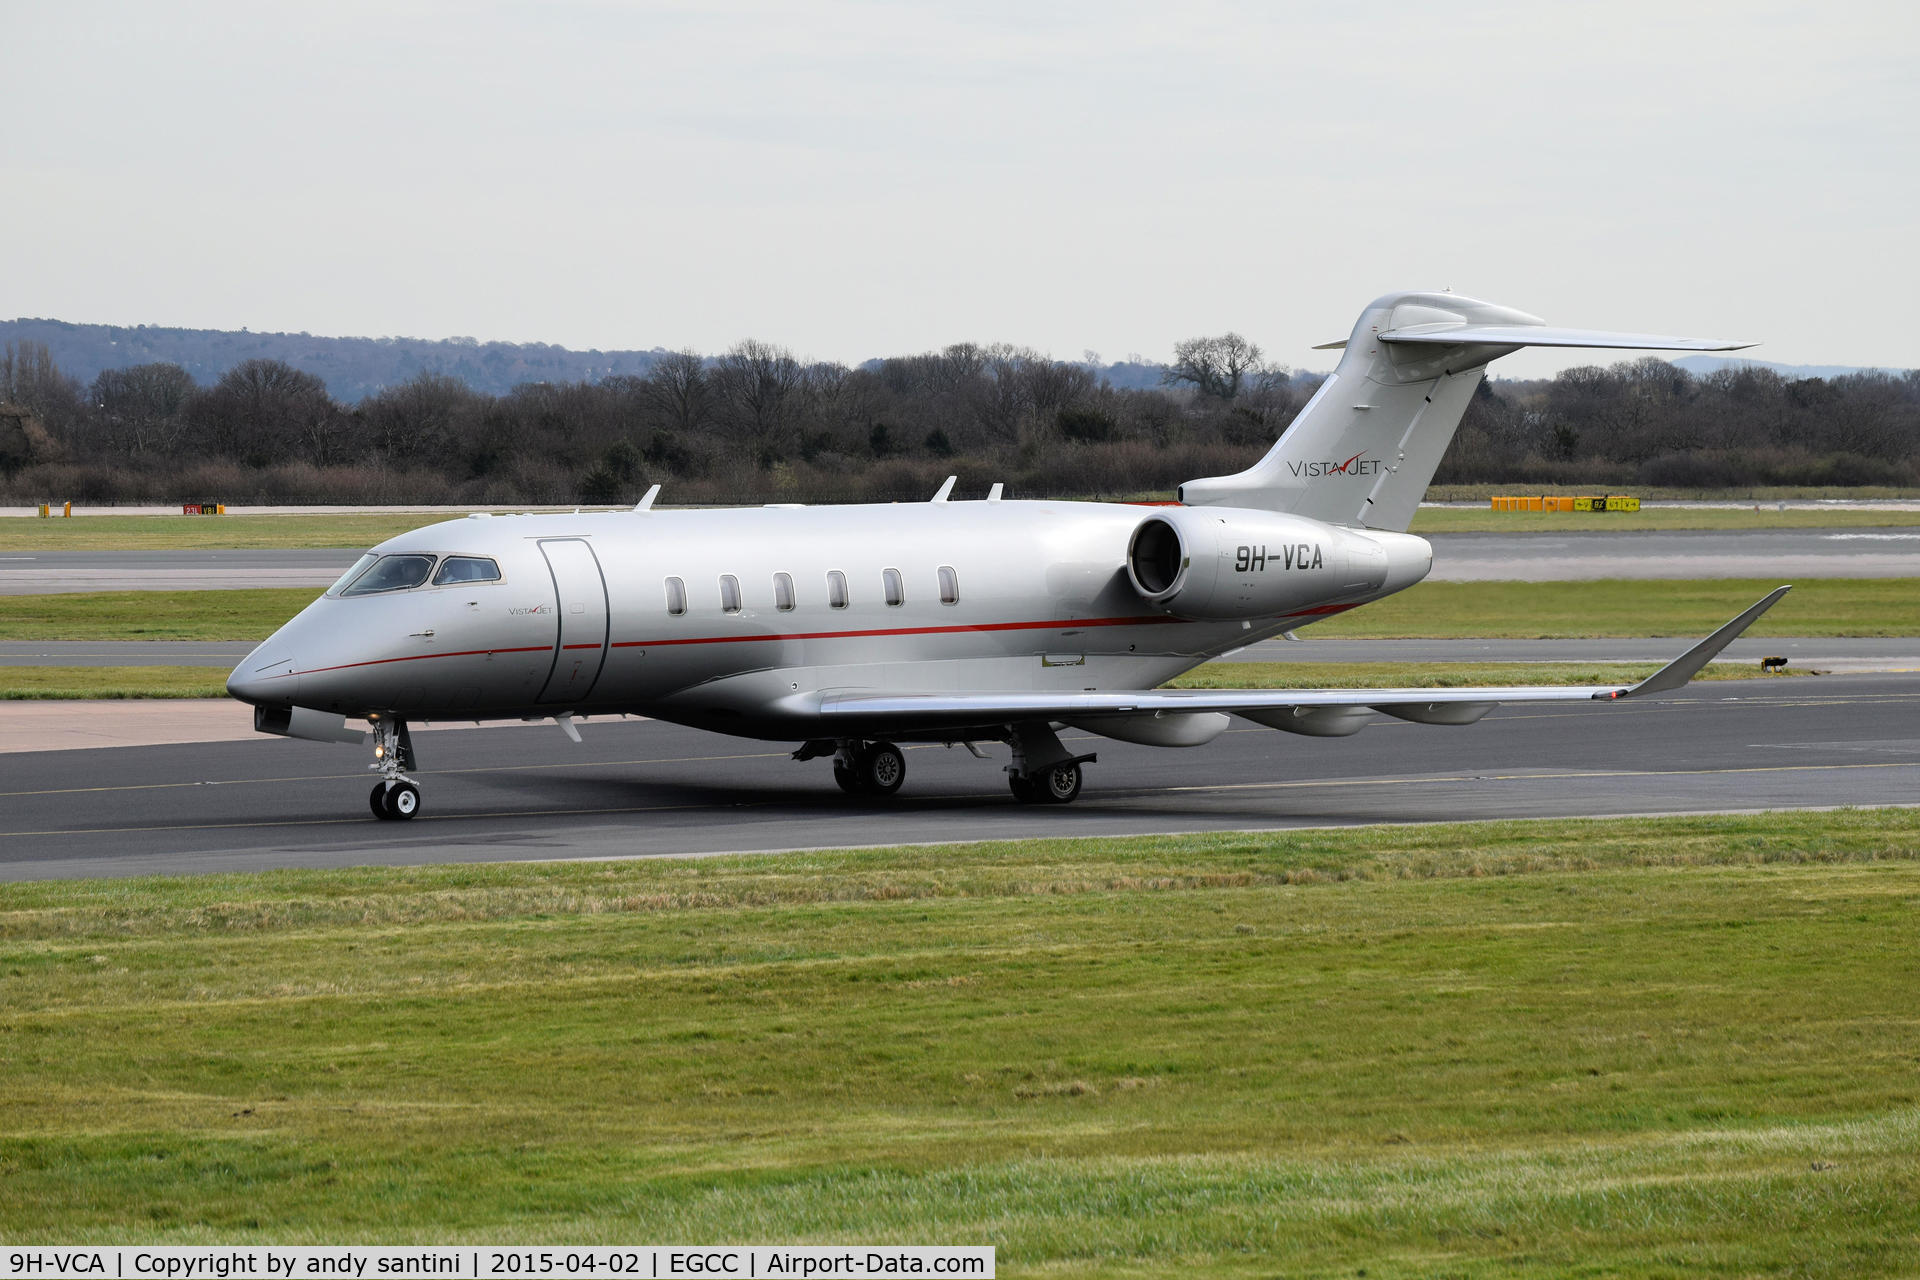 9H-VCA, 2014 Bombardier Challenger 350 (BD-100-1A10) C/N 20513, taxing in to the landmark FBO ramp at [EGCC]